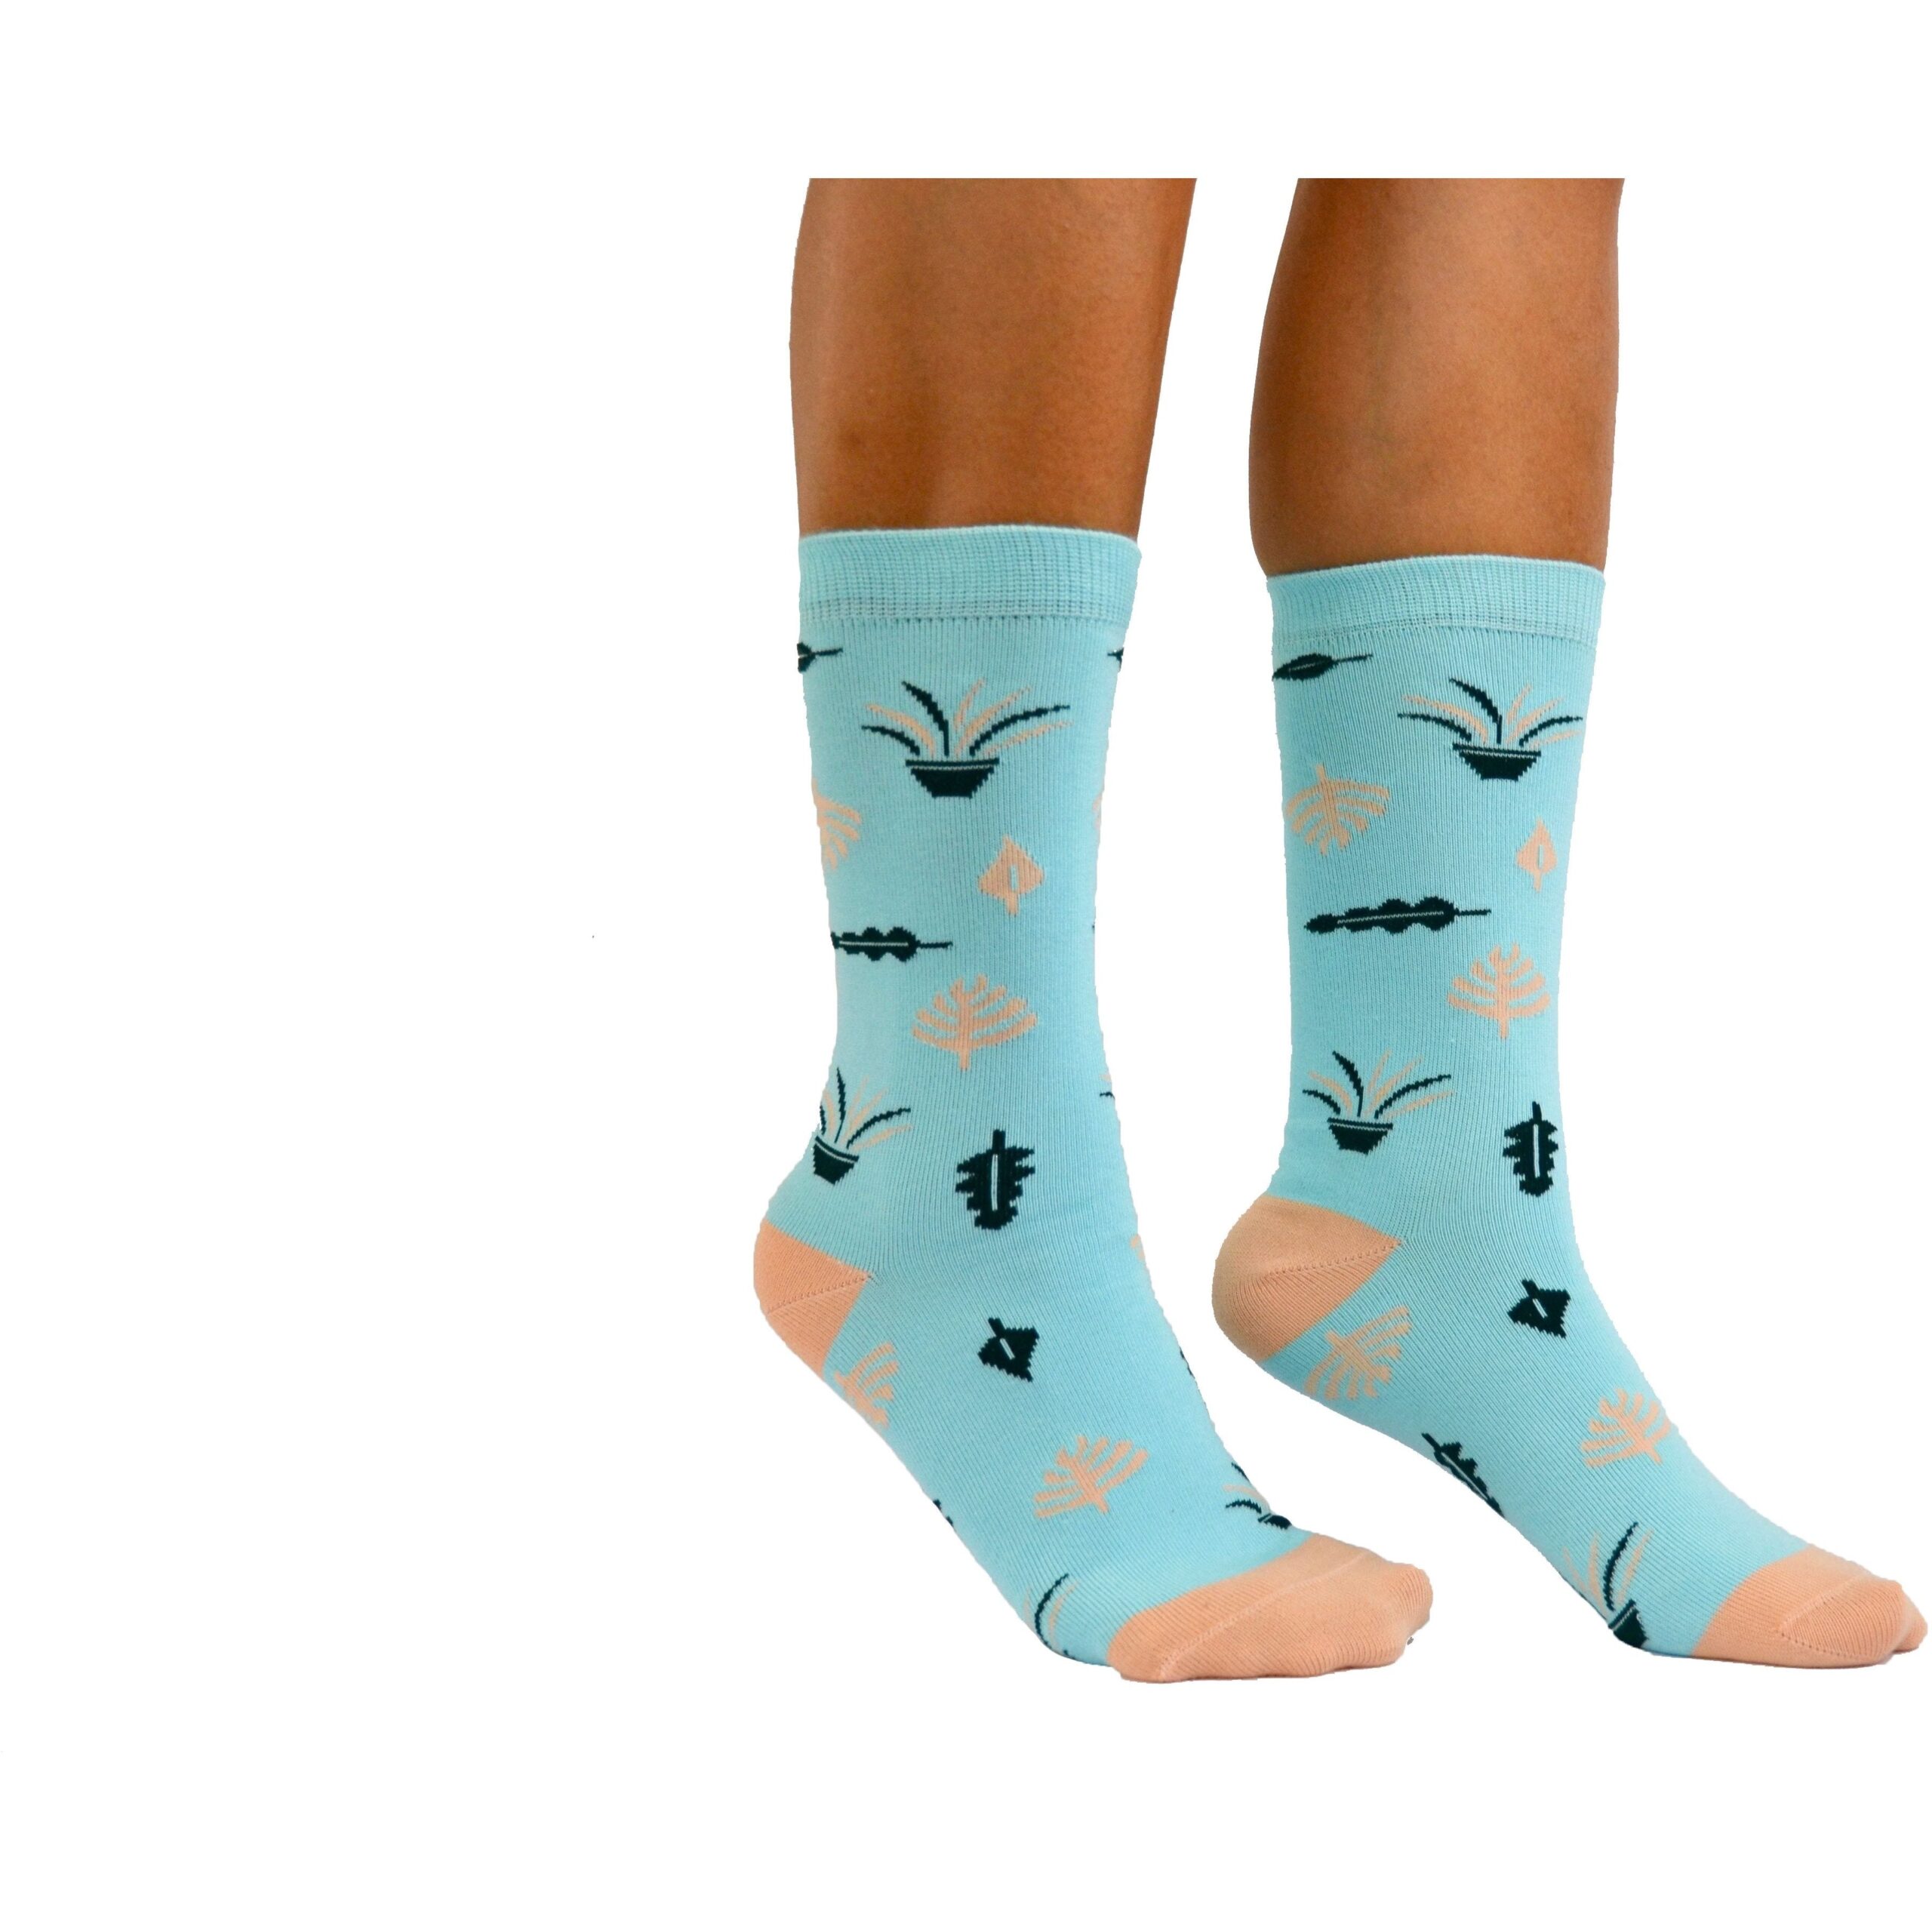 A pair of women's socks with birds on them, available at the best plant nursery near me.